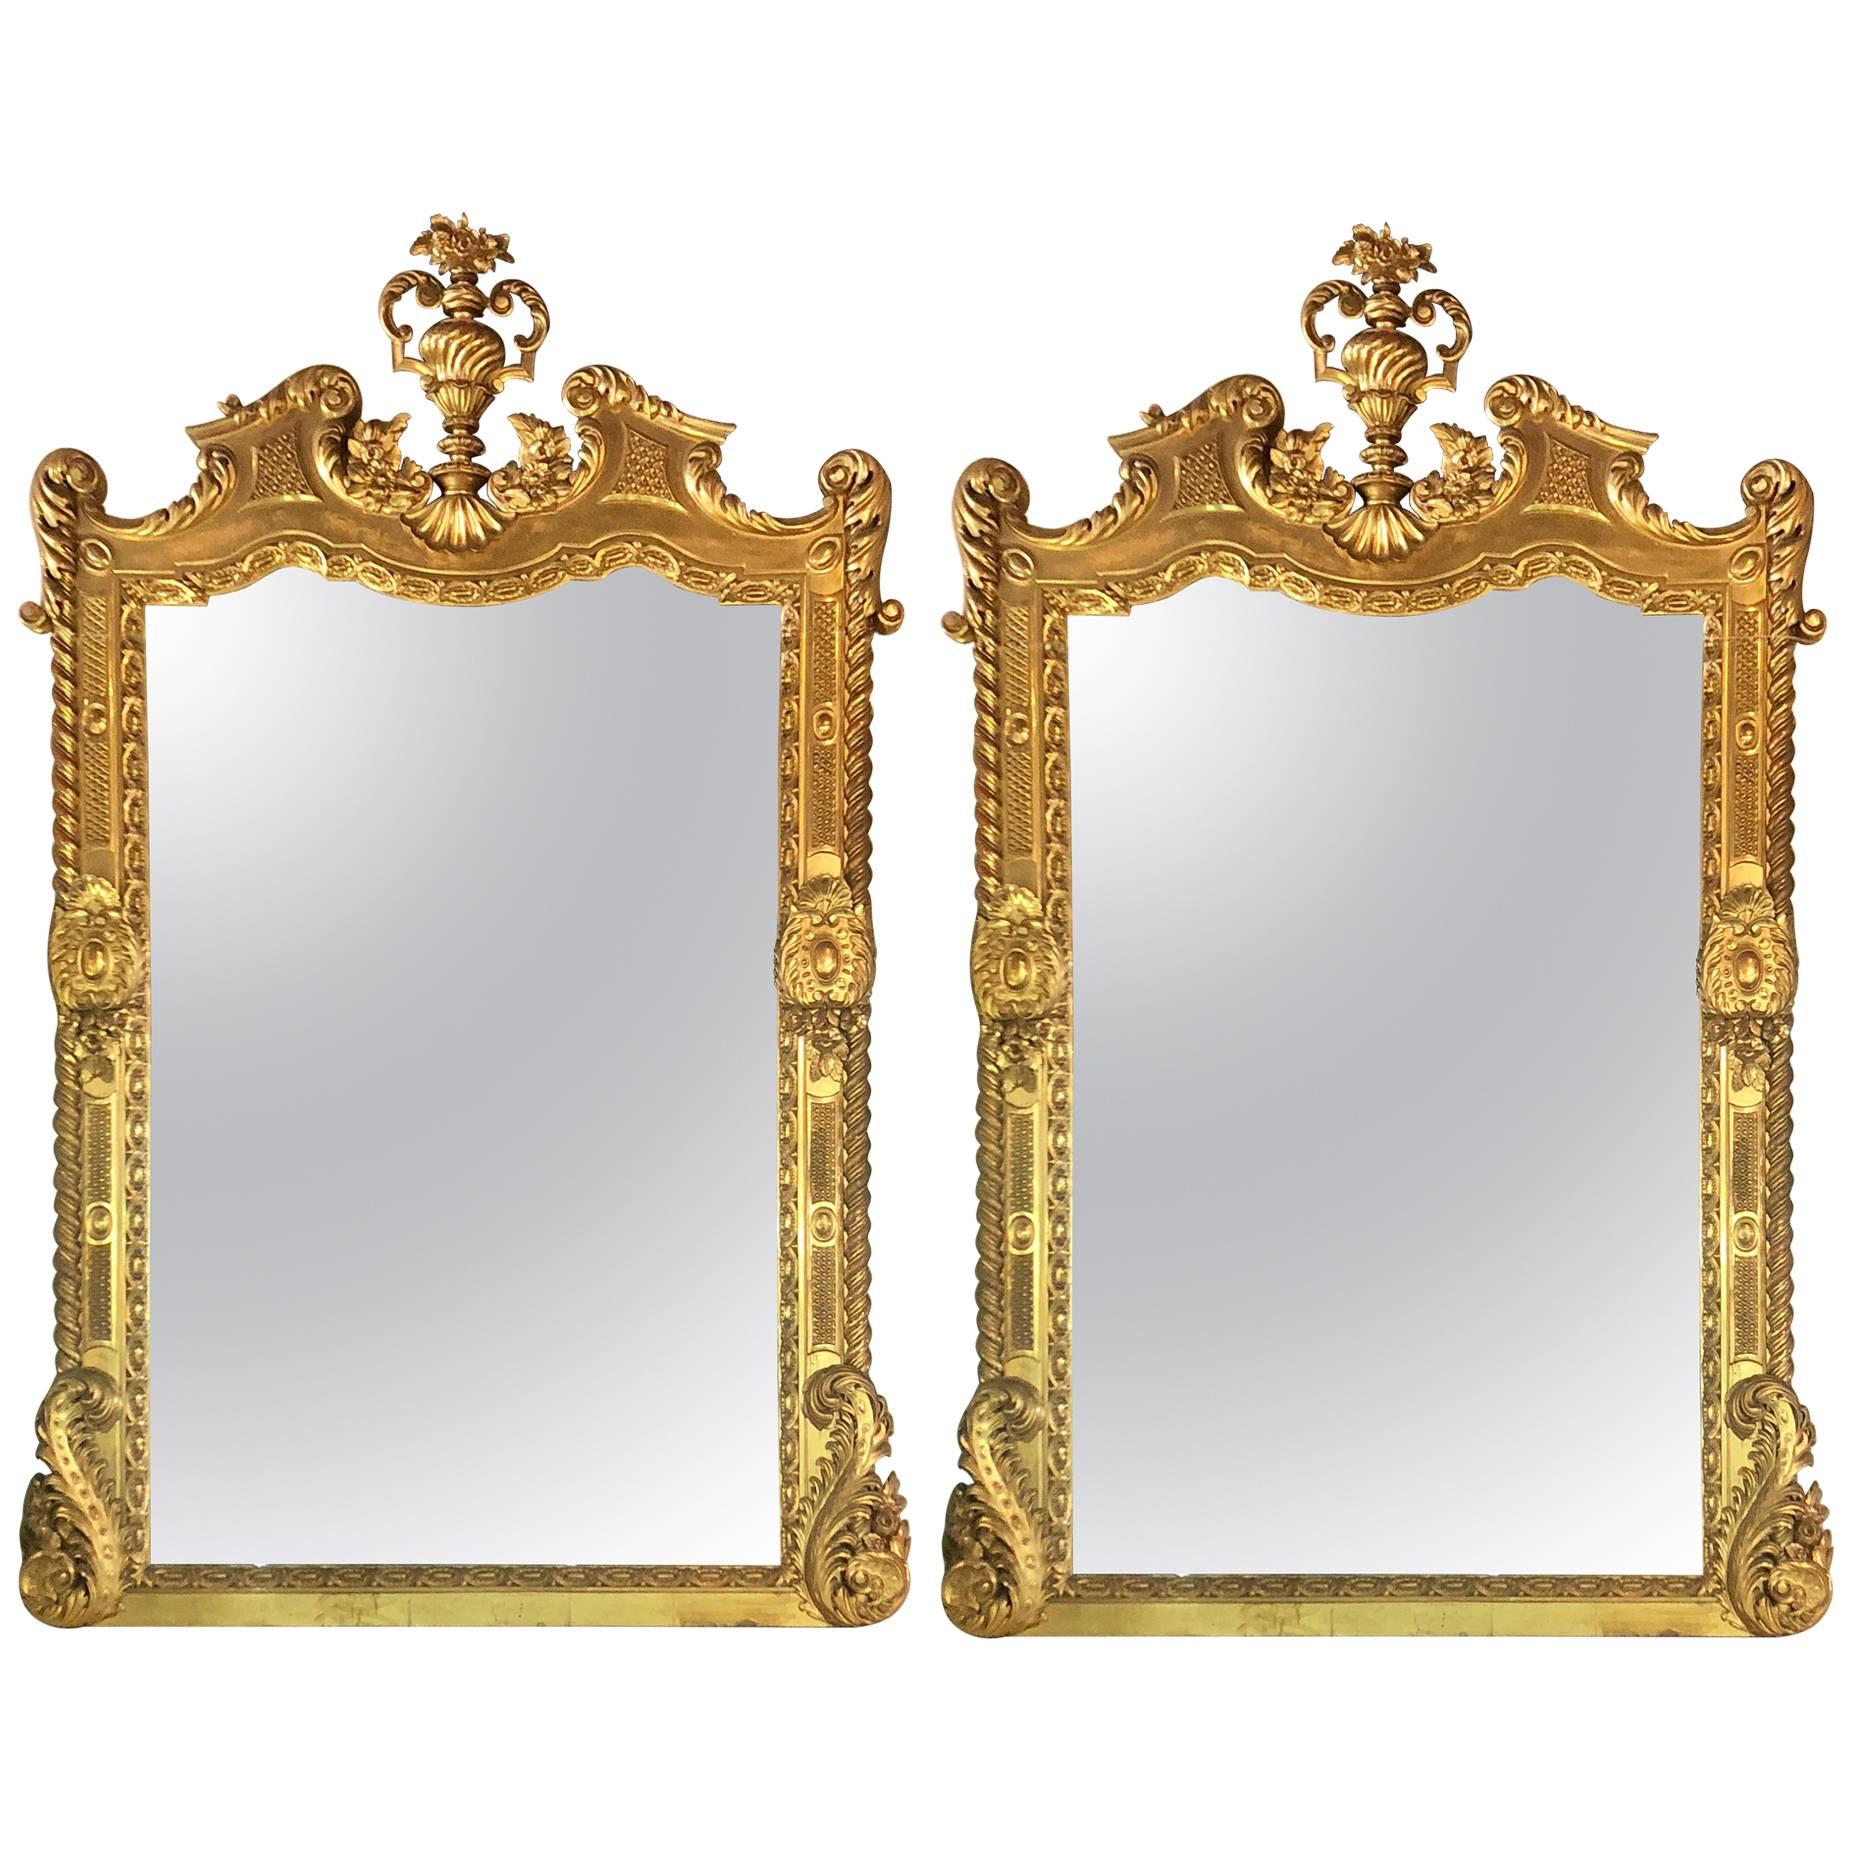 Monumental Pair of Finely Carved Italian Console Mirrors with Finials